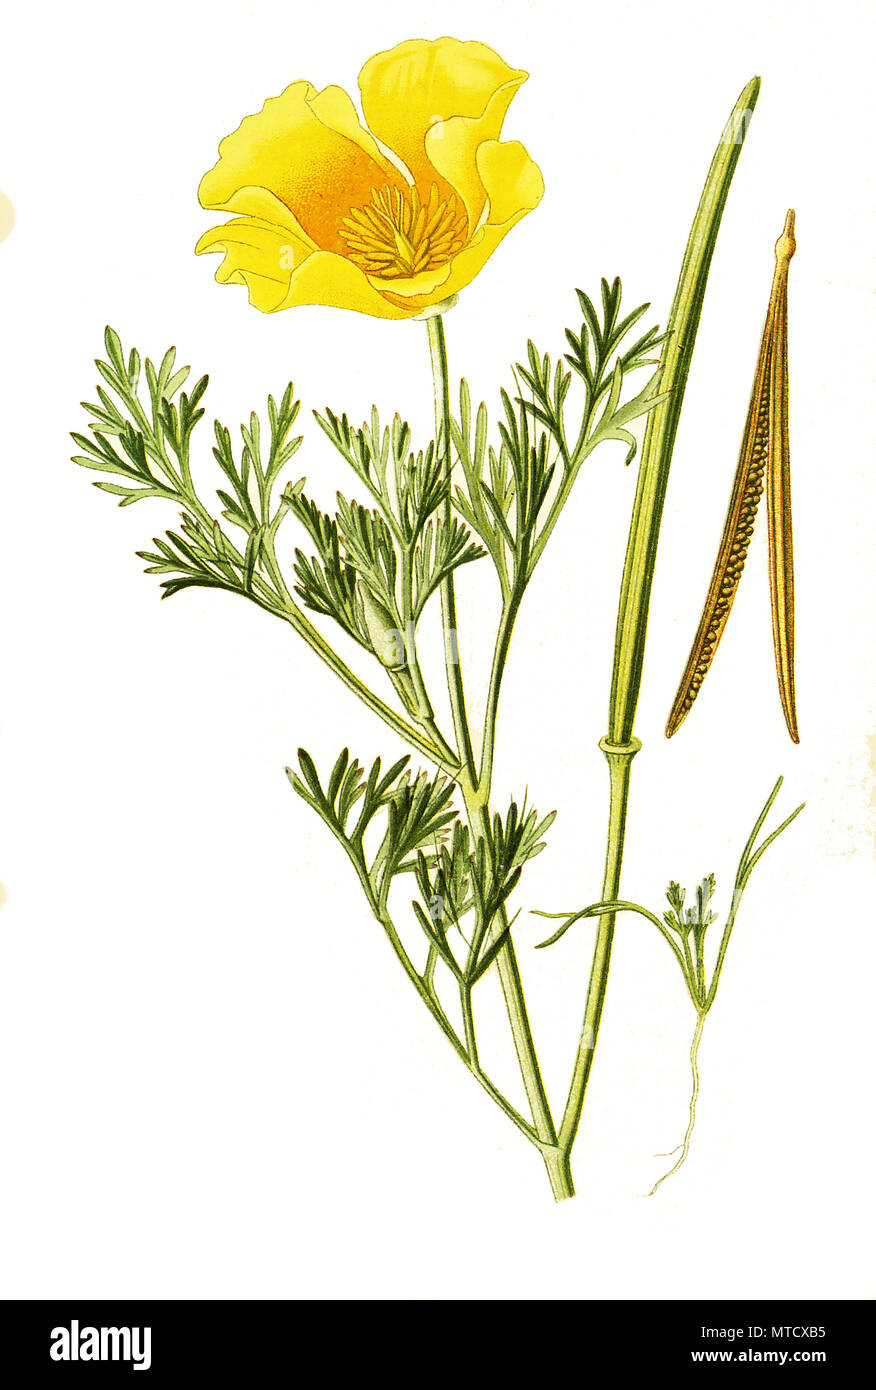 Eschscholtzia californica, Calfornian Poppy, golden poppy, California sunlight, cup of gold. Kalifornischer Mohn, Goldmohn, Kalifornischer Kappenmohn oder SchlafmÃ¼tzchen, digital improved reproduction from a print of the 19th century Stock Photo